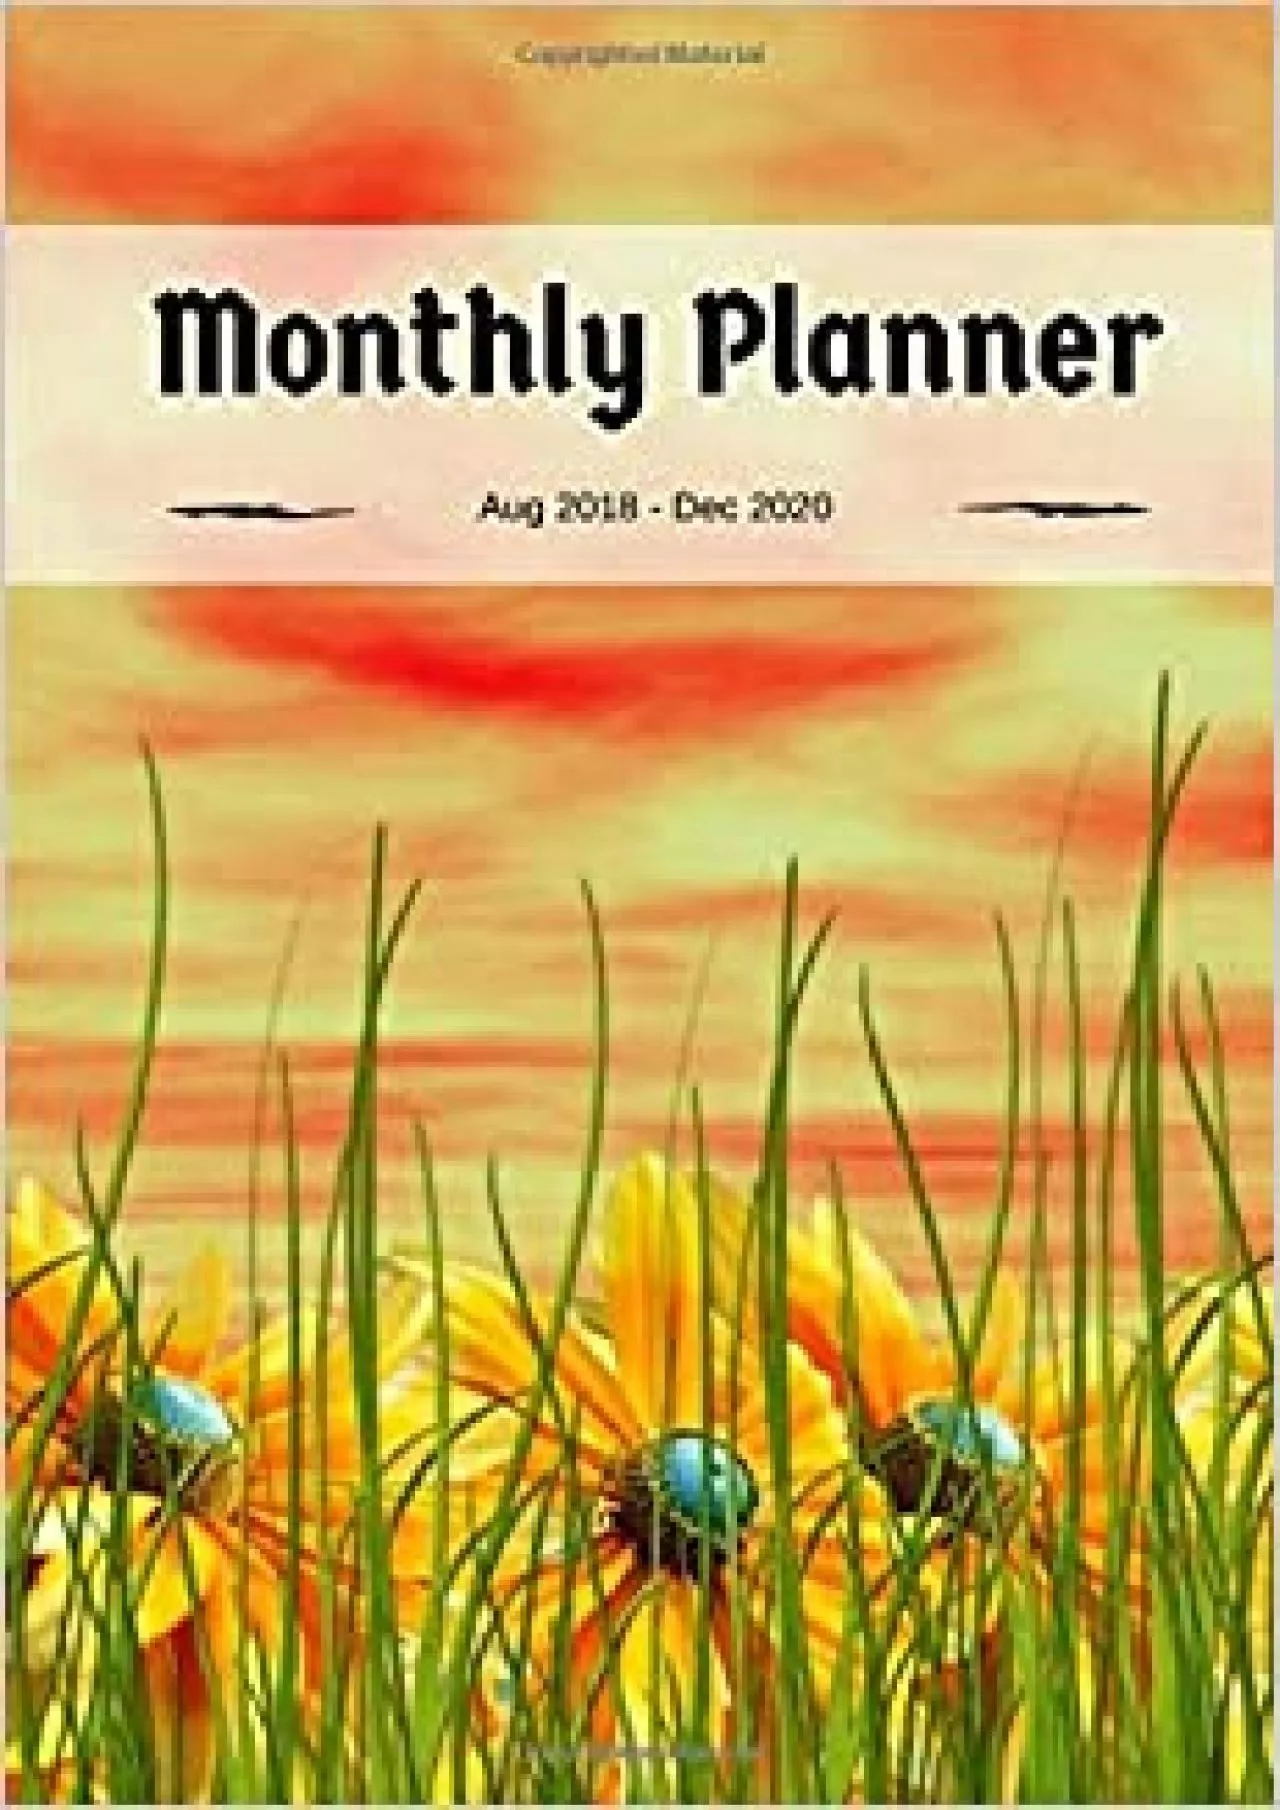 (READ)-Monthly Planner 2018-2020: Monthly Planner August 2018 through December 2020, 6